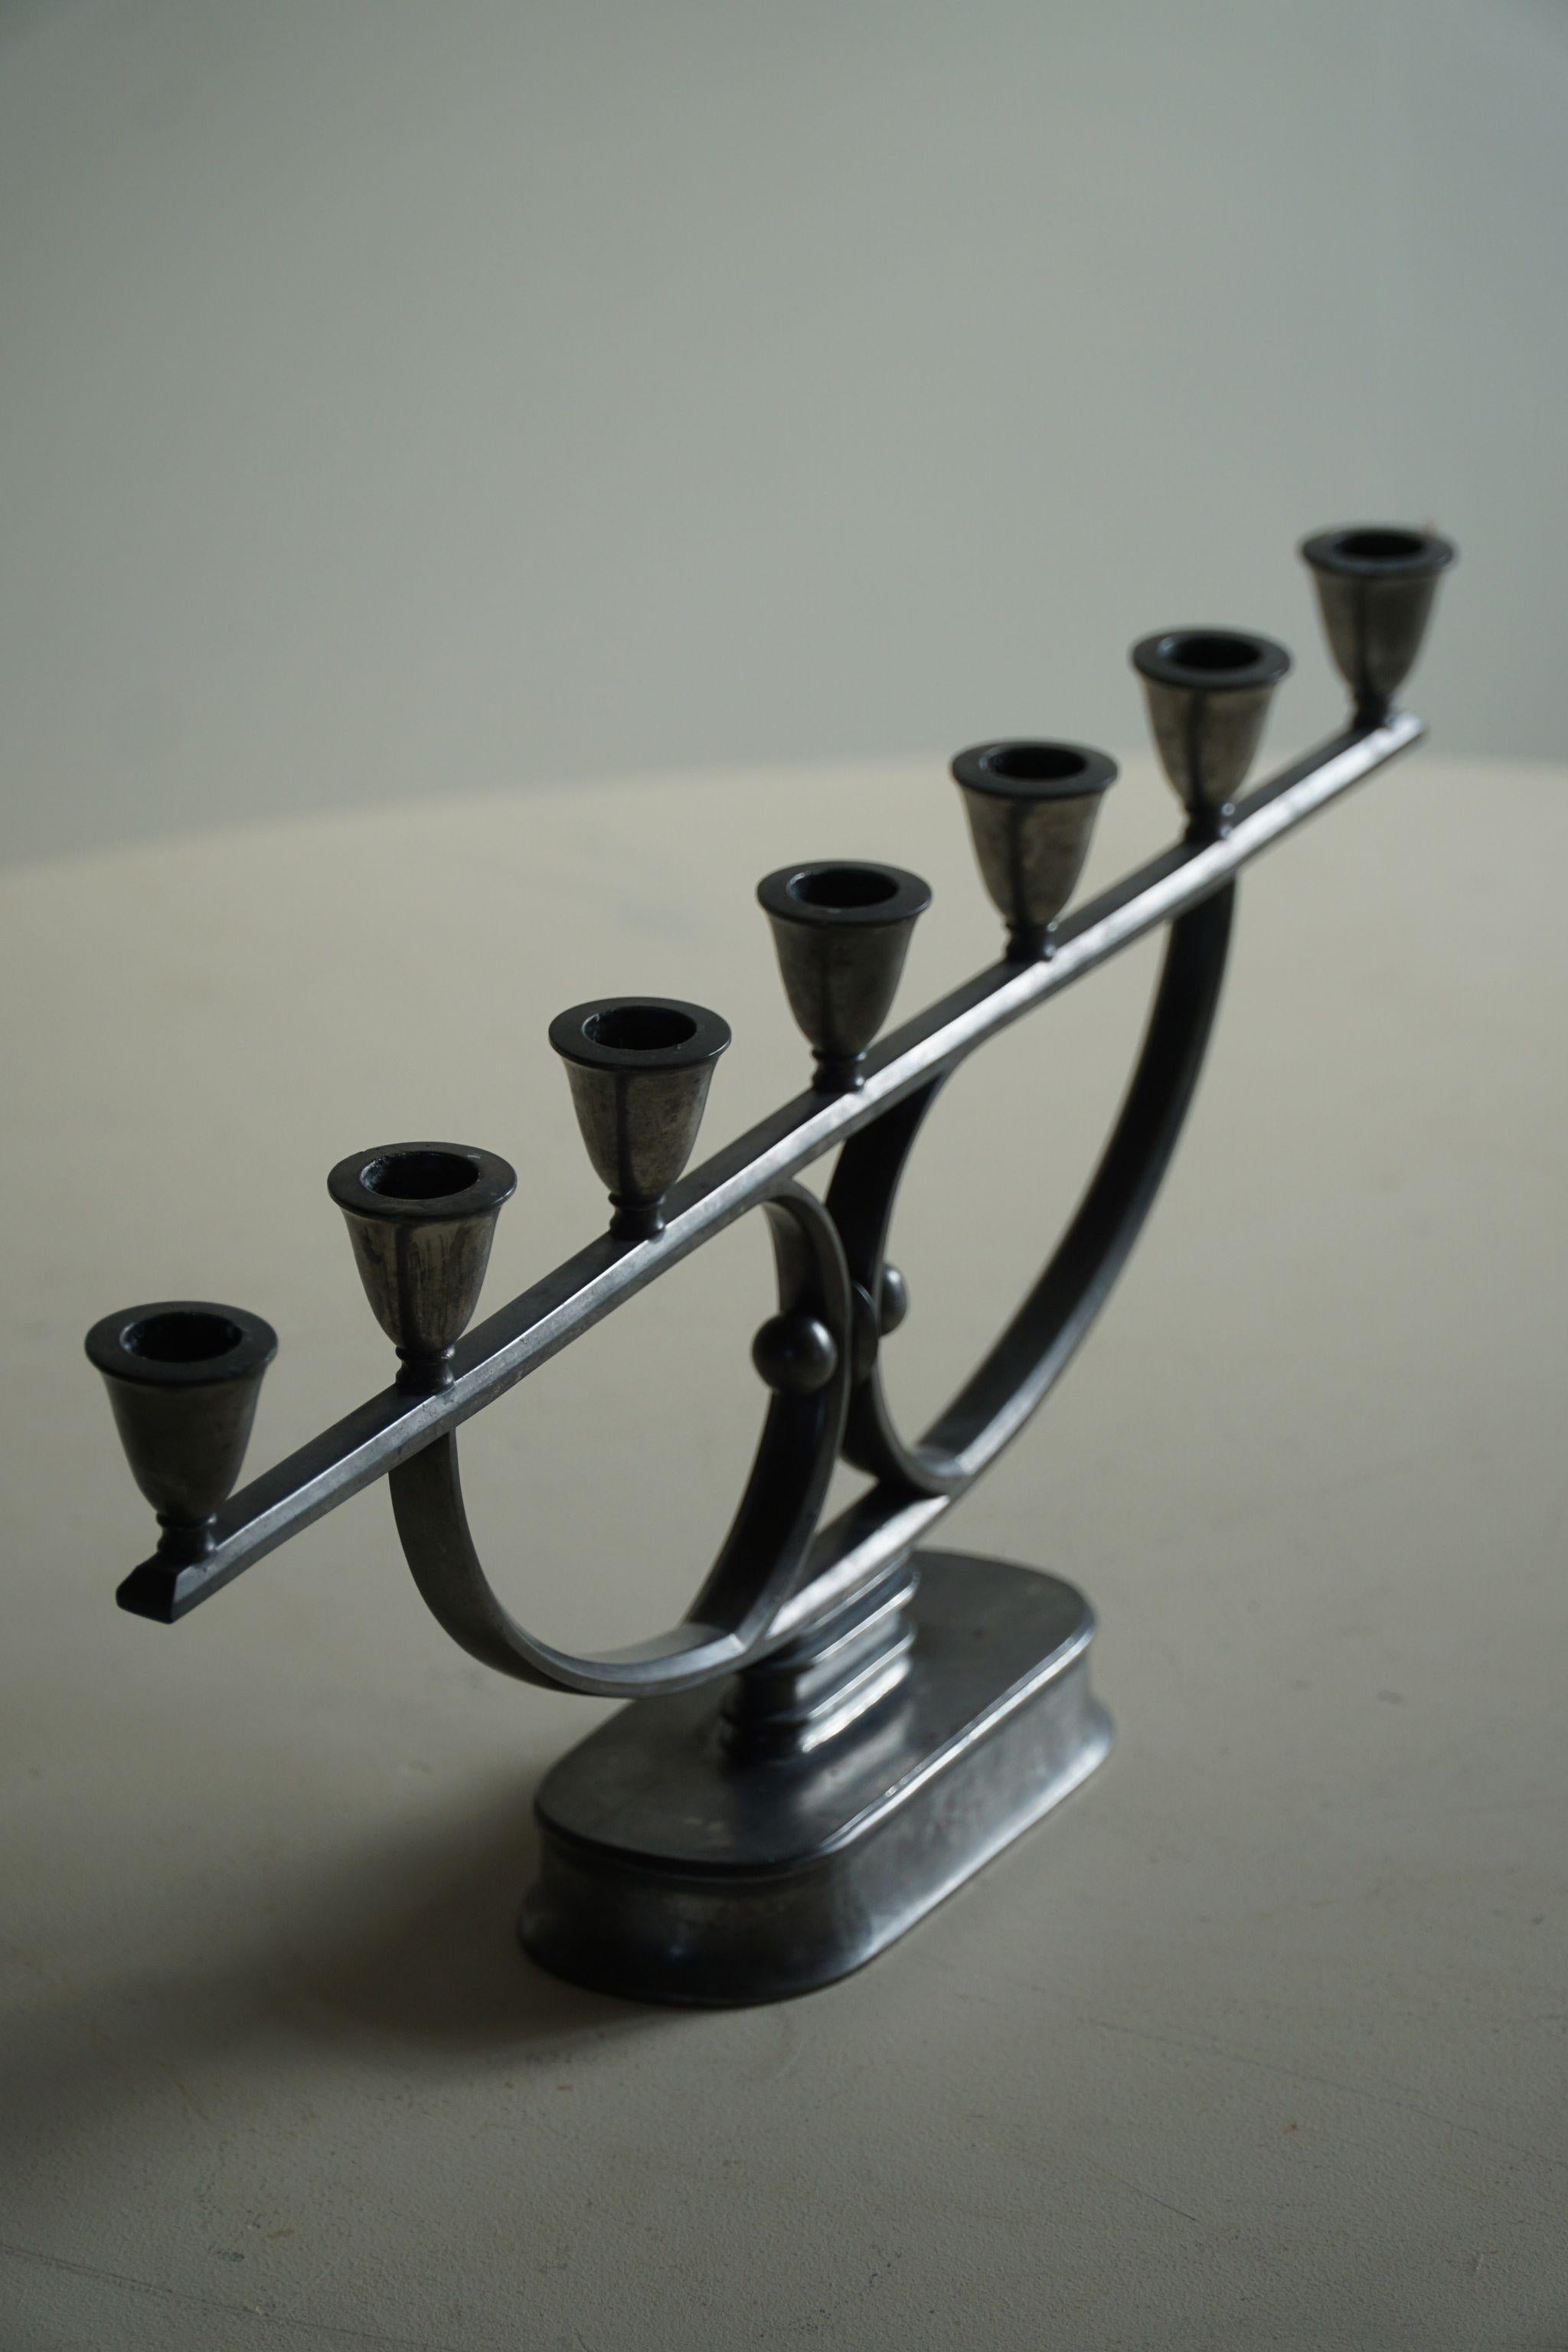 A beautiful rare large candle holder / candlestick in metal. Made by Danish designer Just Andersen in the 1920s. Signed underneath.

Just Andersen (1884-1943) is a fine representative of modern Danish neoclassicalism. In terms of style, he belongs